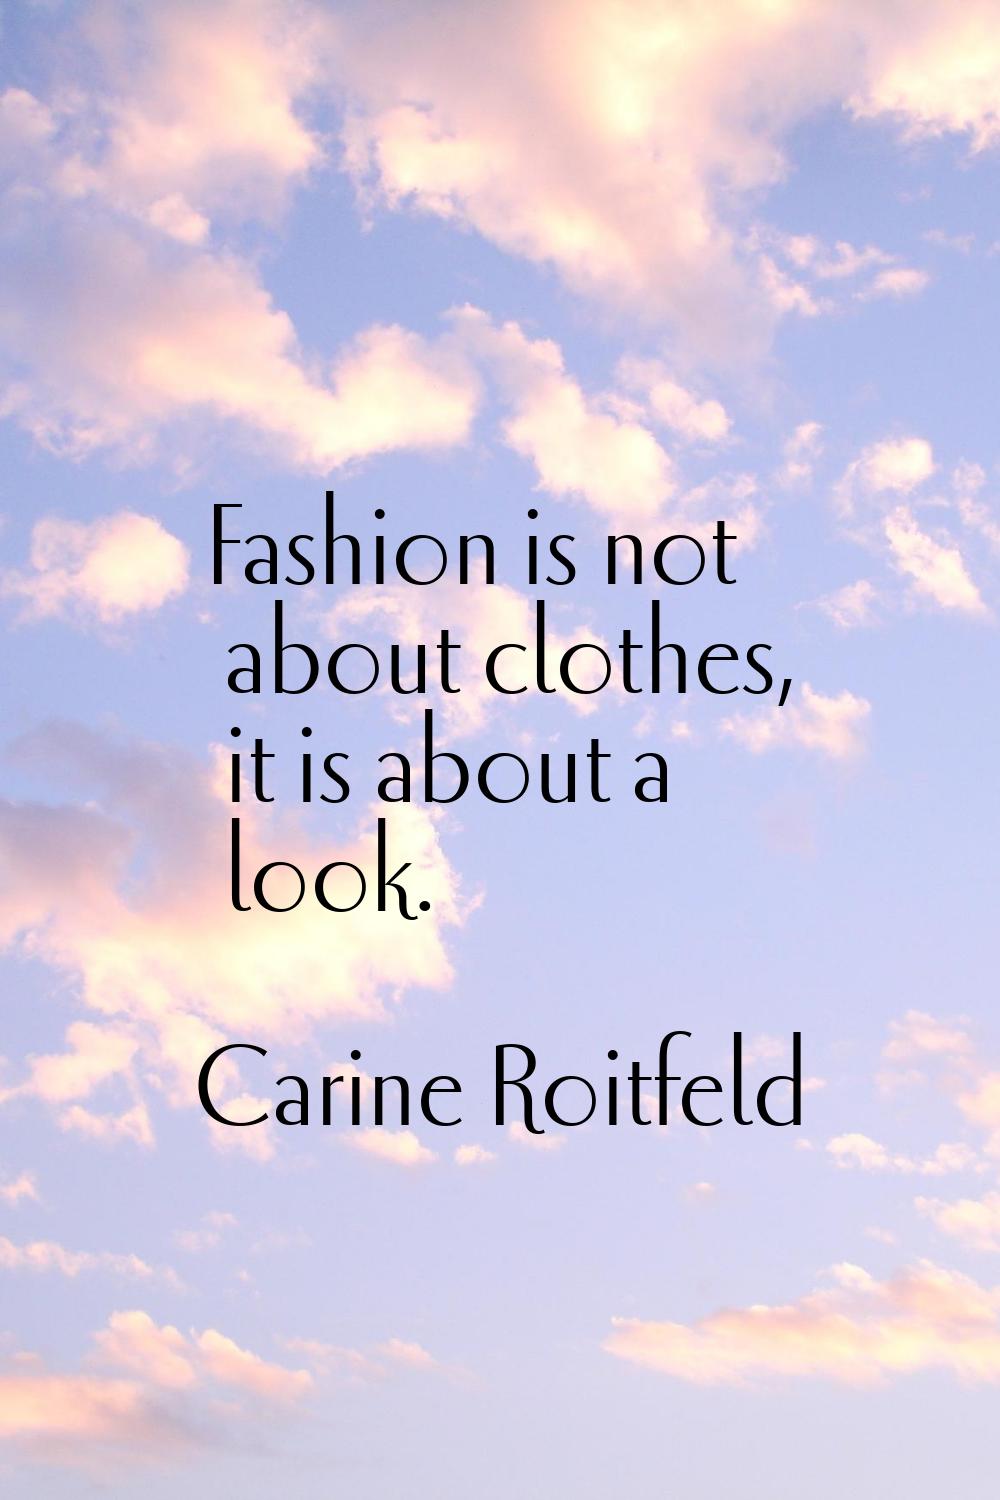 Fashion is not about clothes, it is about a look.